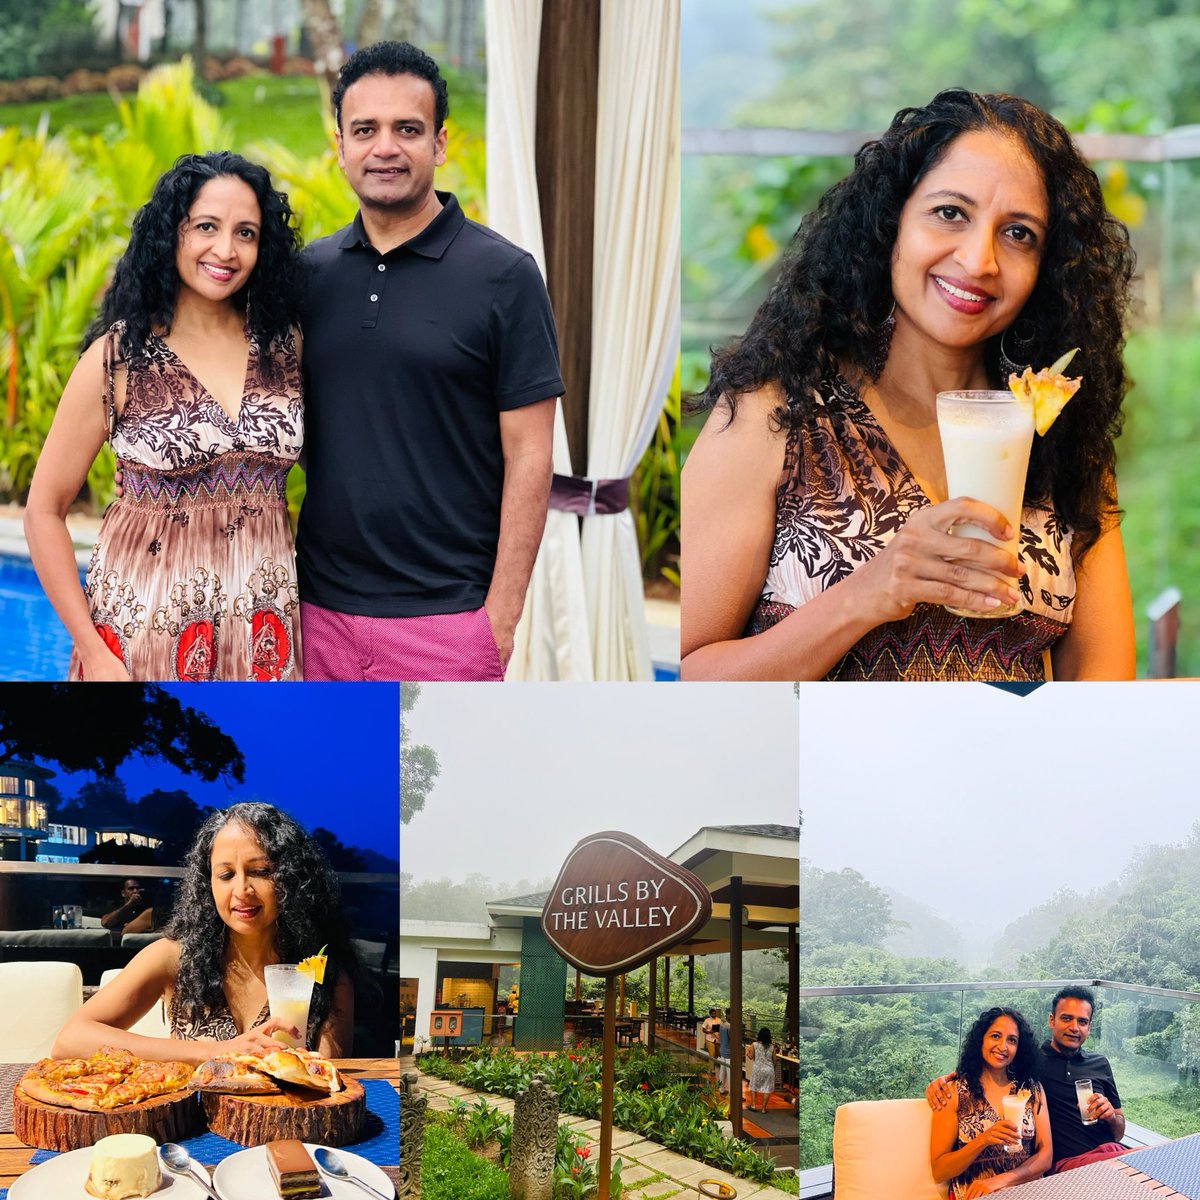 Grills by the Valley at Coorg Marriott and Spa🍹🥂🍕🌮💕
Thank you to Vedanth and Lasya for these beautiful clicks 😍😍
ಮಧುರ ಕ್ಷಣಗಳು 💕
@MarriottIntl @Marriott @visitcoorg @Travelindia360x @KarnatakaWorld @WTravelMagazine @TravelIndiaTips @CoorgsRock